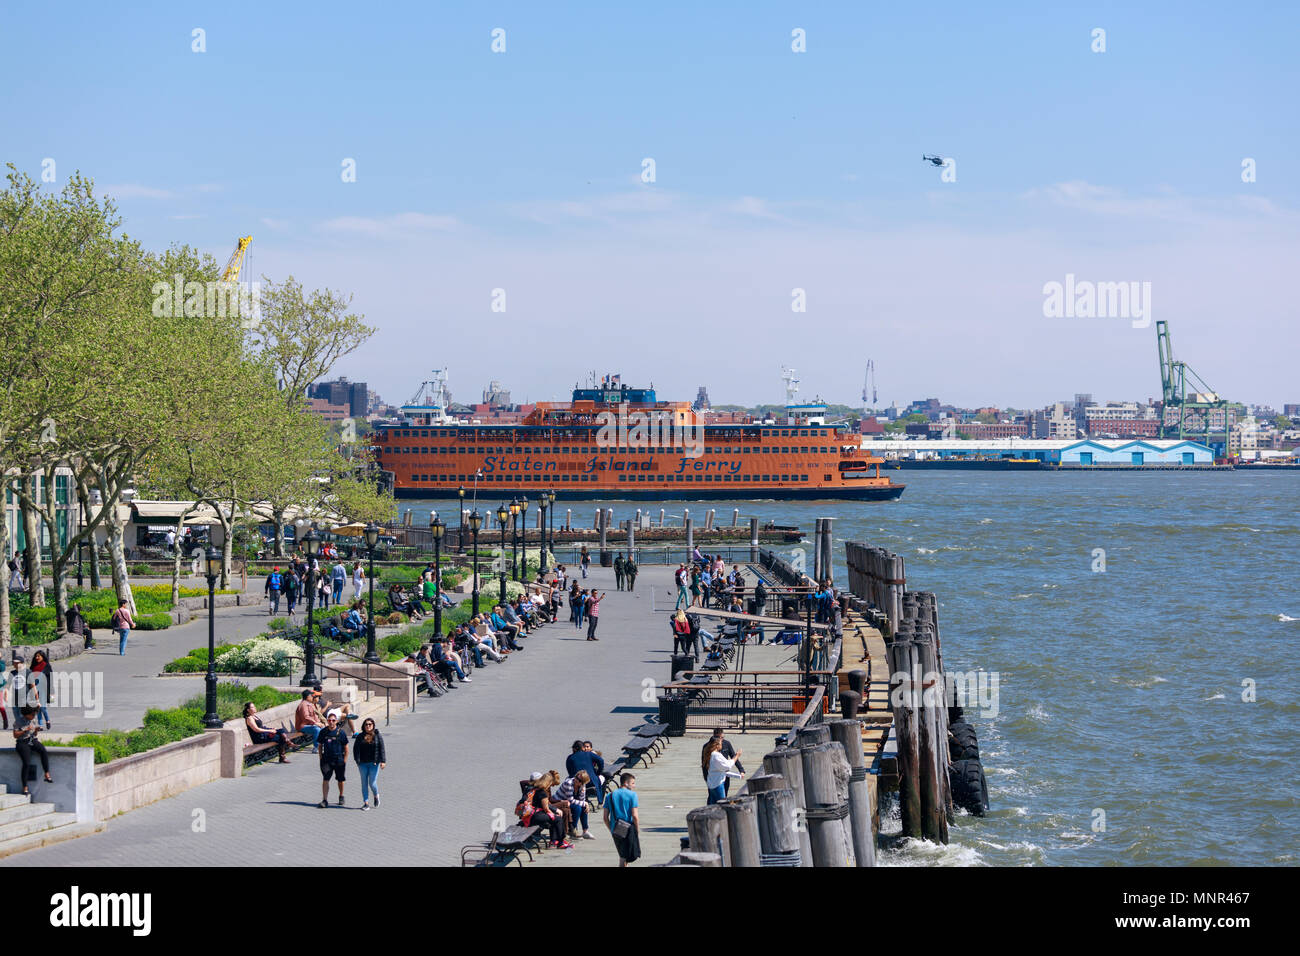 New York, USA - May 9, 2018 : The massive Staten Island Ferry departs from Battery Park in New York City. It is a free rides that offers great views o Stock Photo